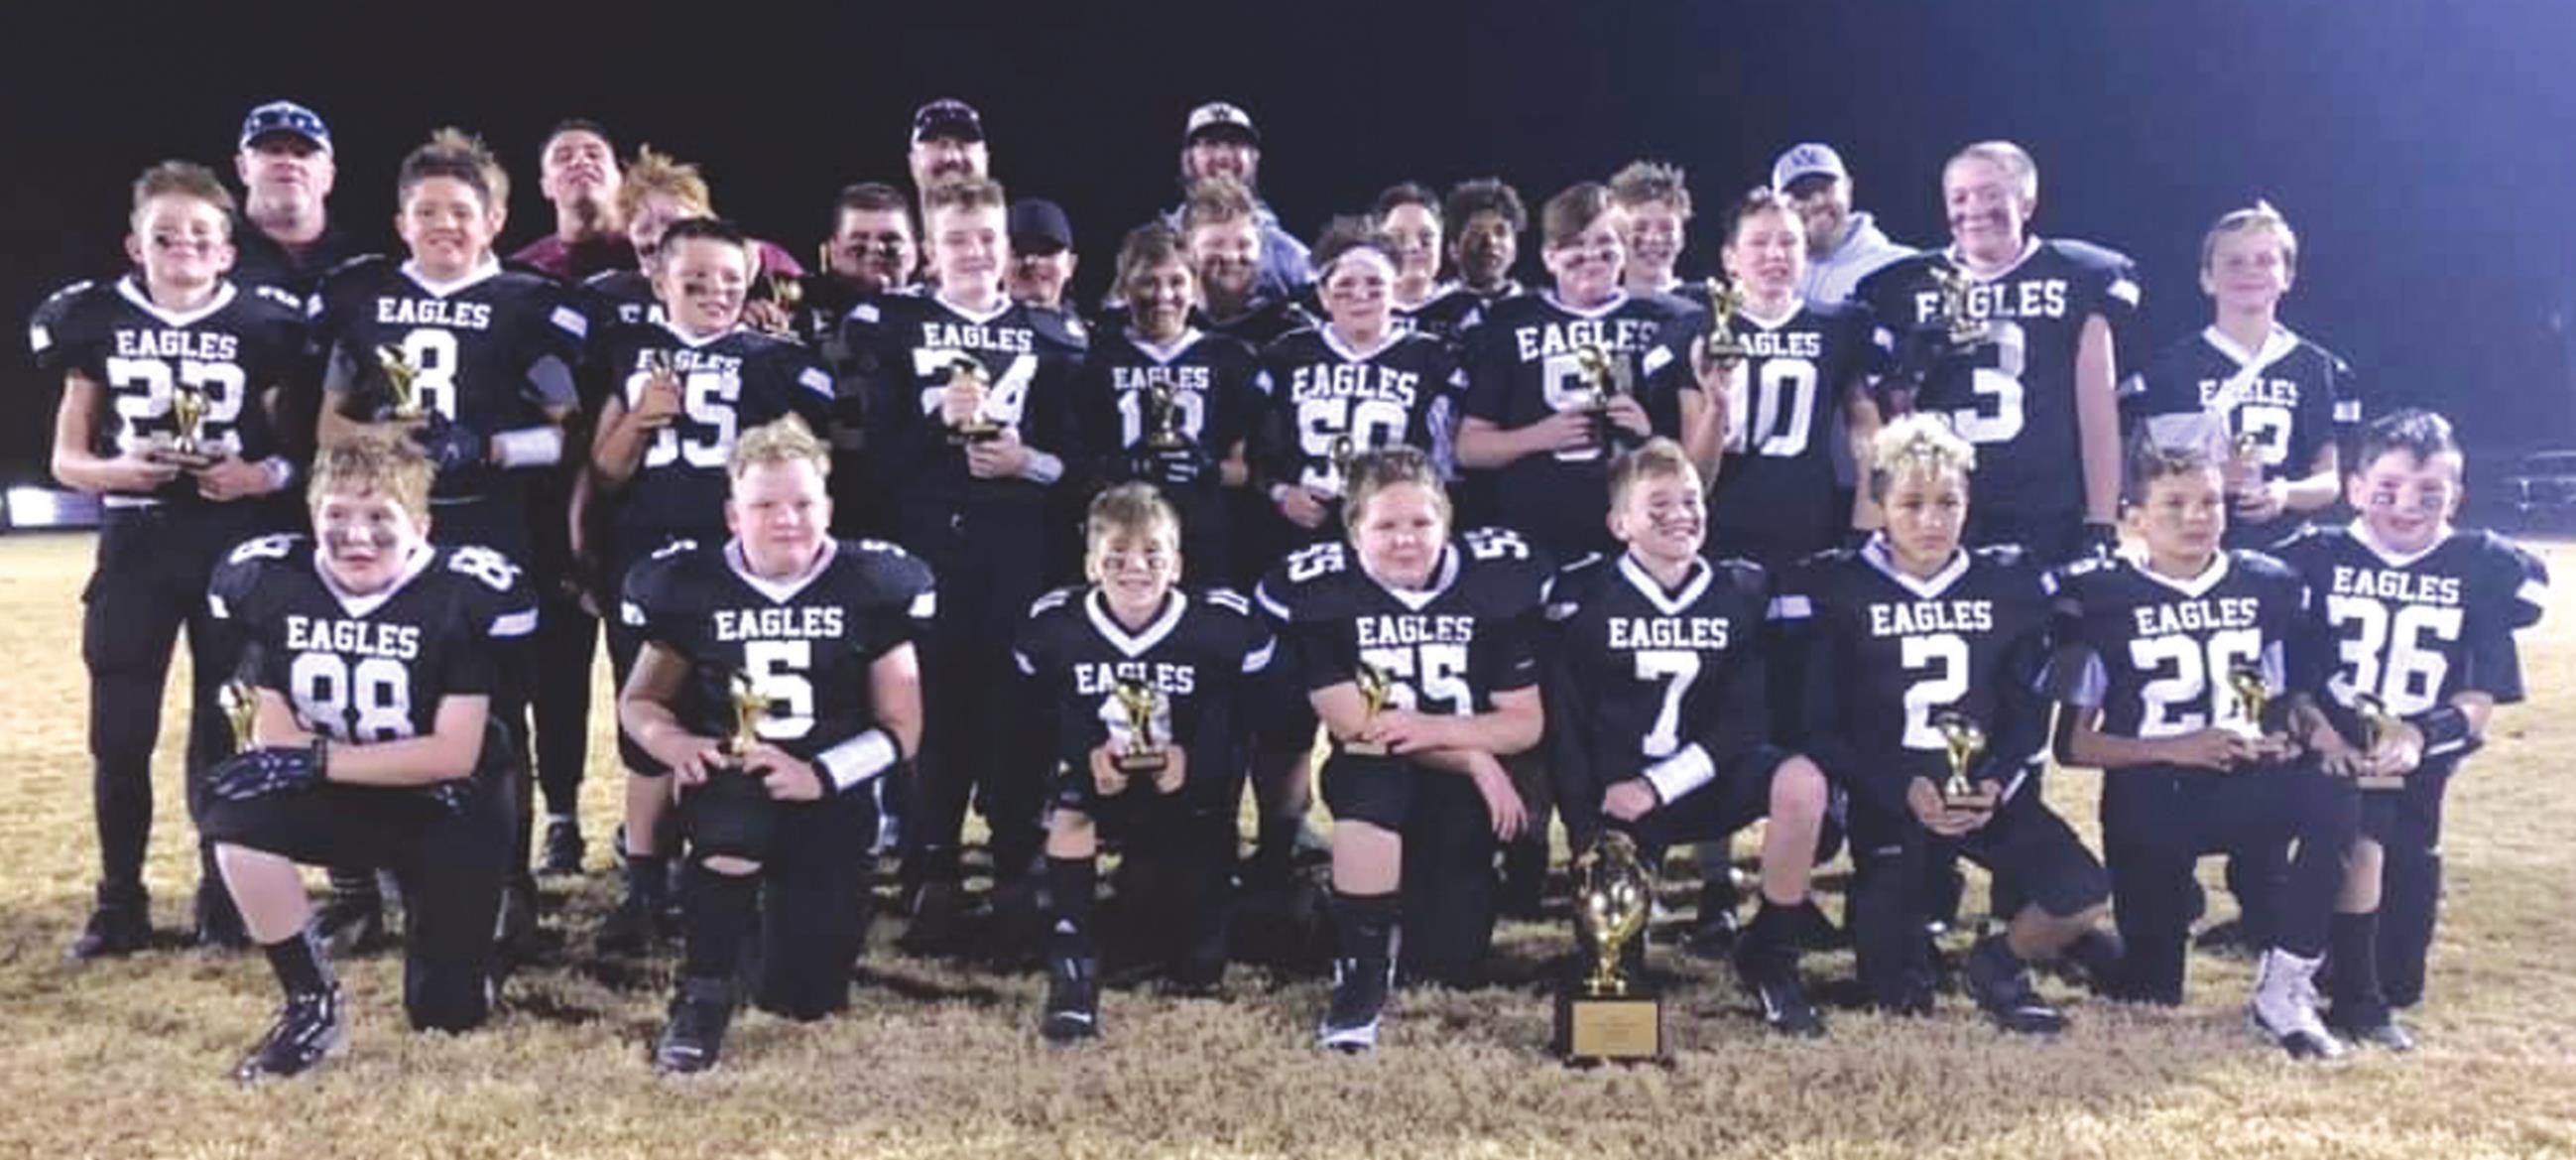 The Weatherford Eagles 6th grade football team defeats Altus 34-6 in the D3 Oklahoma Independent Youth Football League Super Bowl. Provided